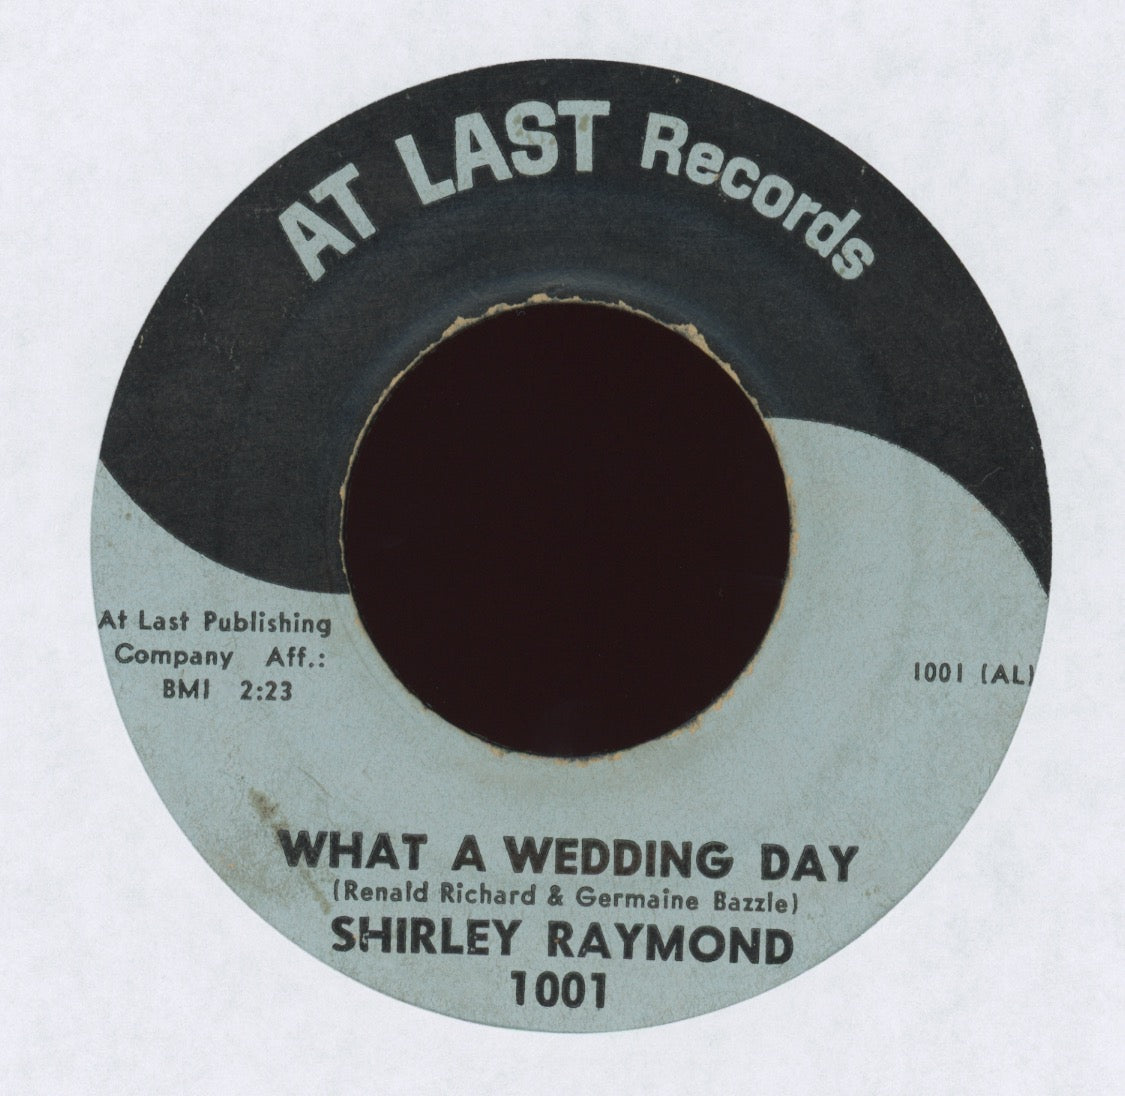 Shirley Raymond - What A Wedding Day on At Last